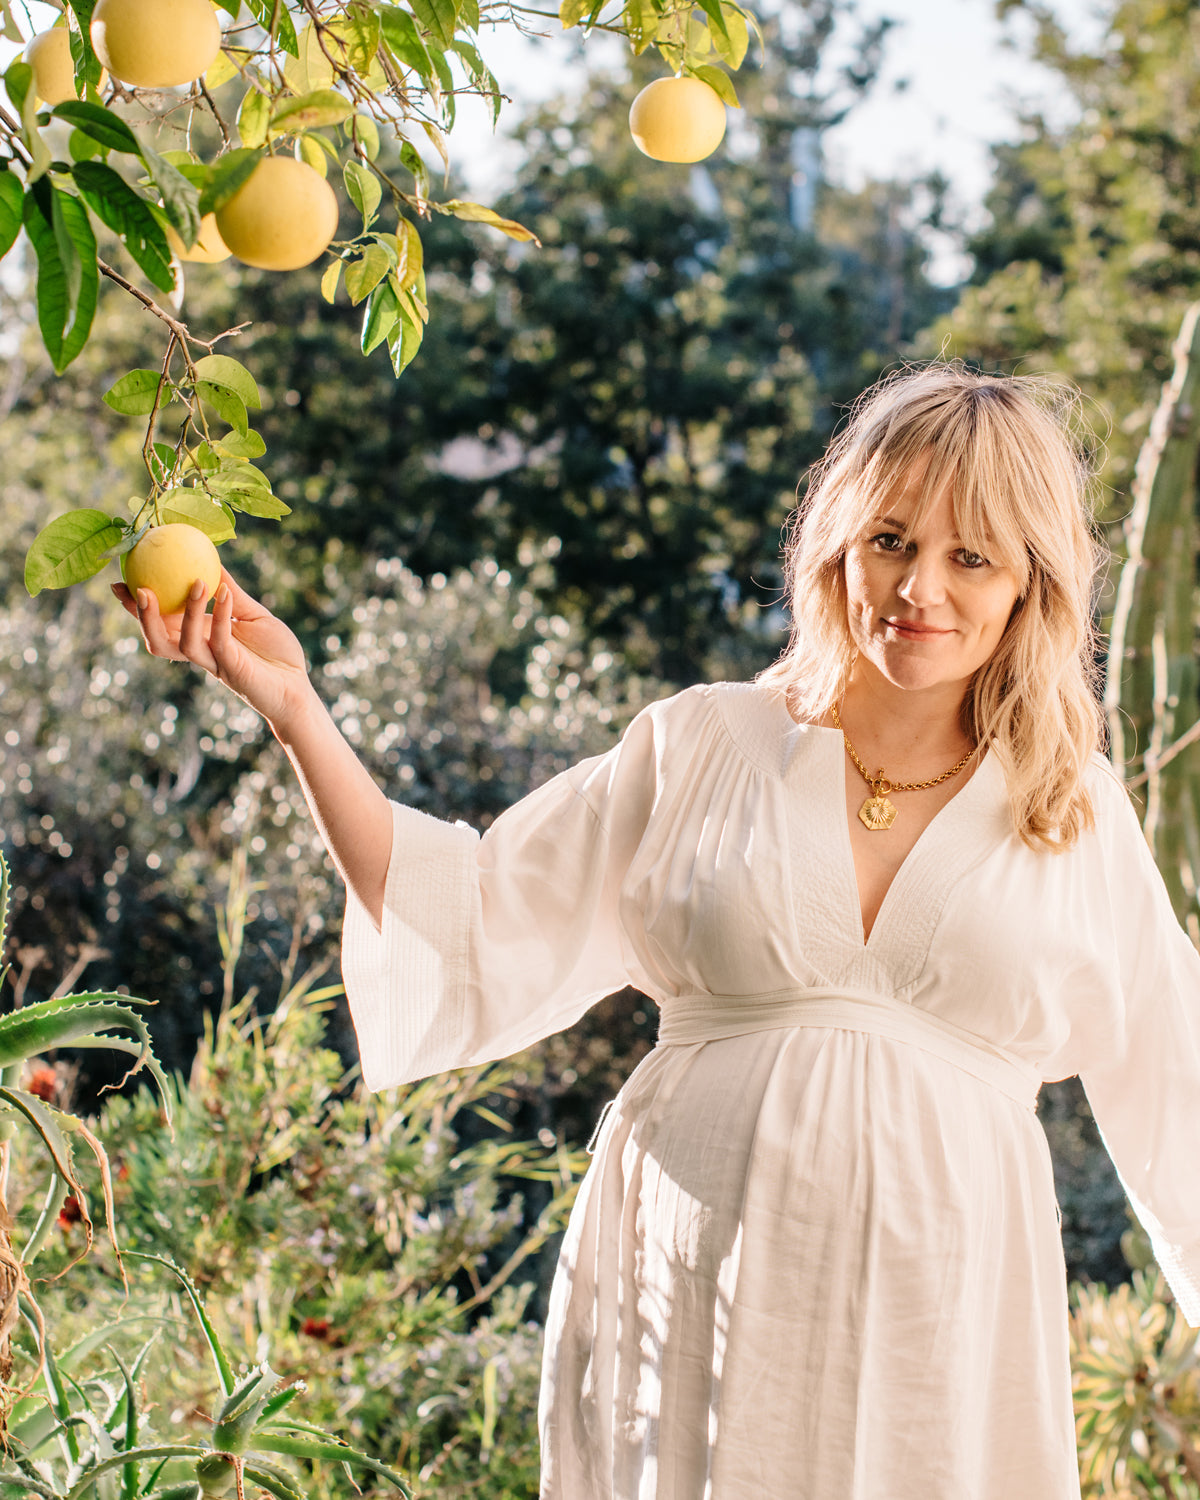 female with blonde hair wearing a white dress picking a lemon from a tree.